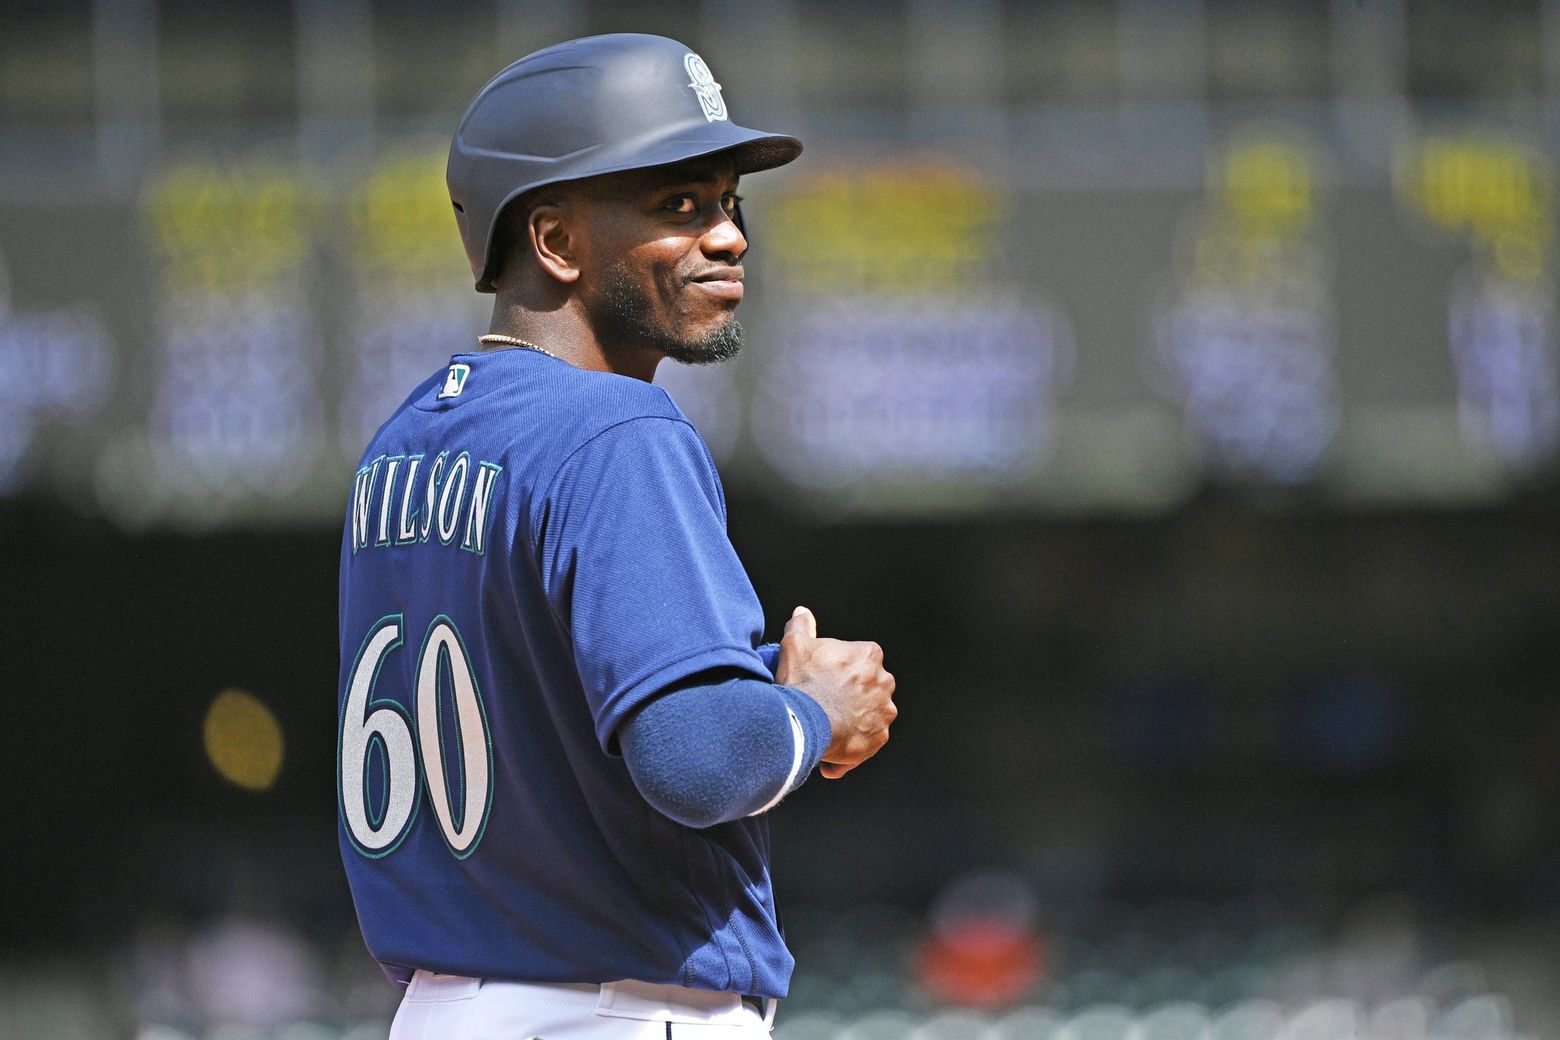 After eight years of the grind, Marcus Wilson makes his major league with the Mariners | Seattle Times